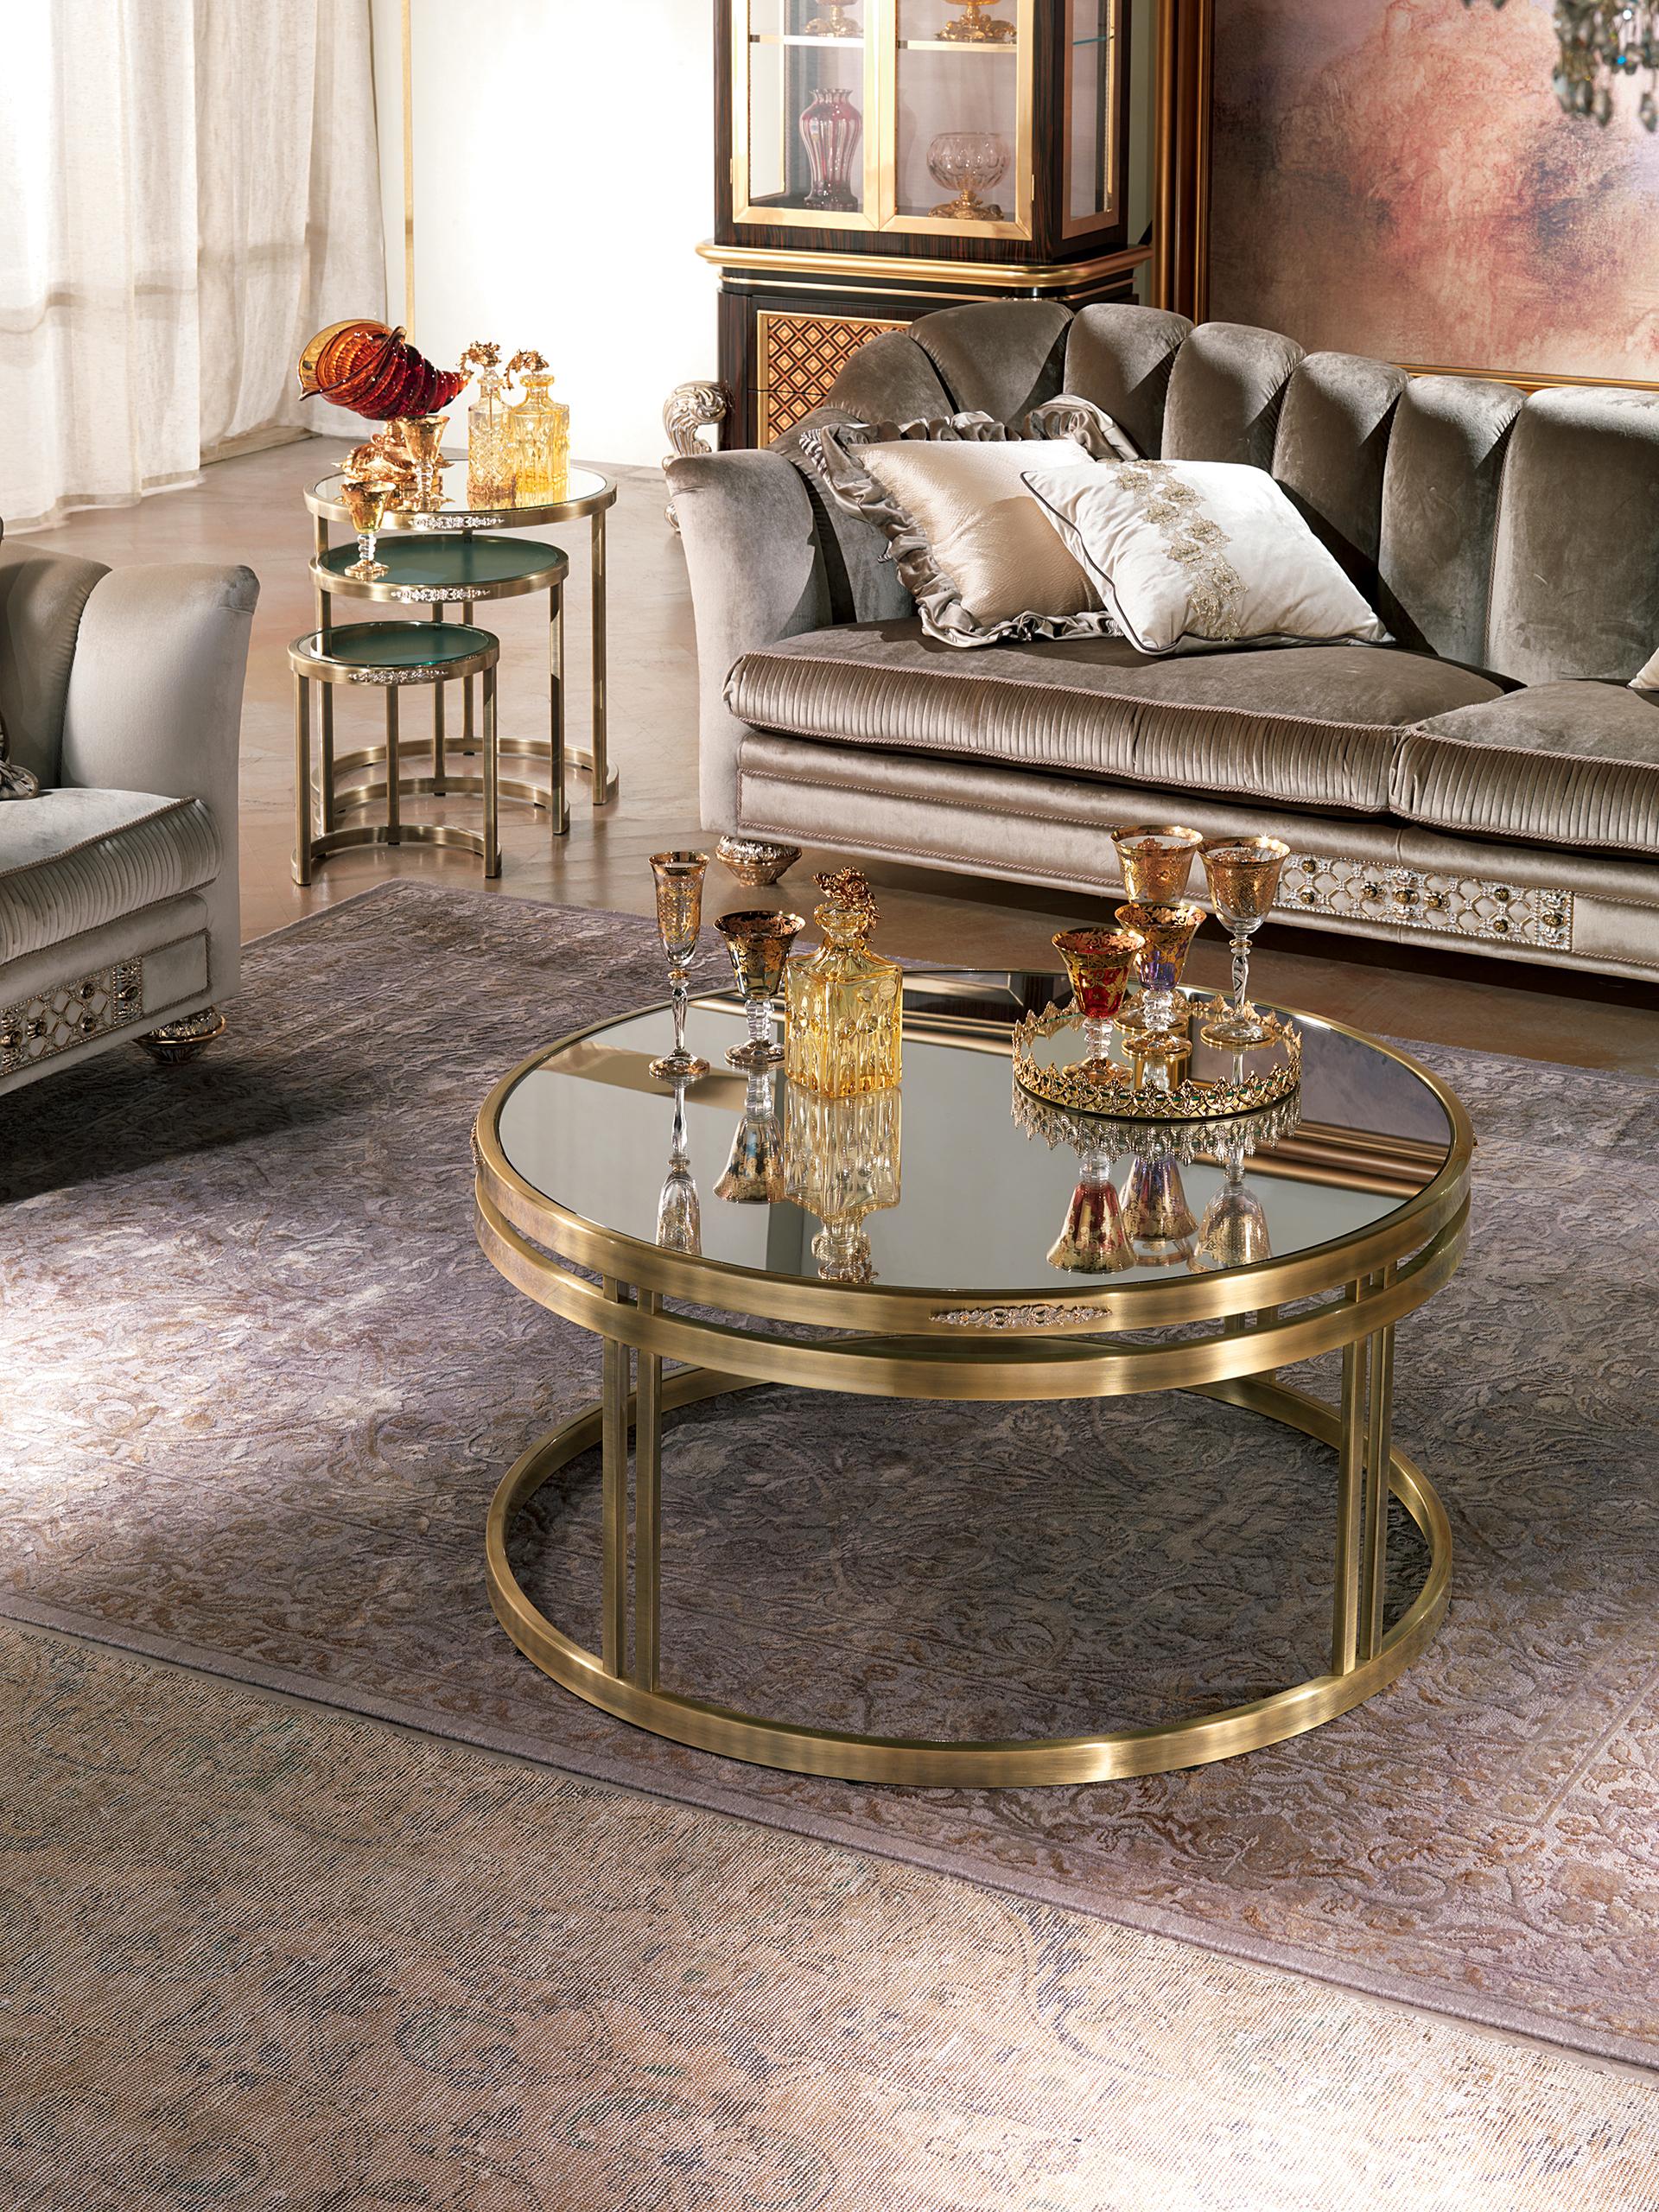 The AY075 coffee table trio is a refined and functional furniture ensemble that adds elegance and style to any room.

Material and Structure: These side tables are made of brass, a material with a golden sheen that adds a touch of luxury and